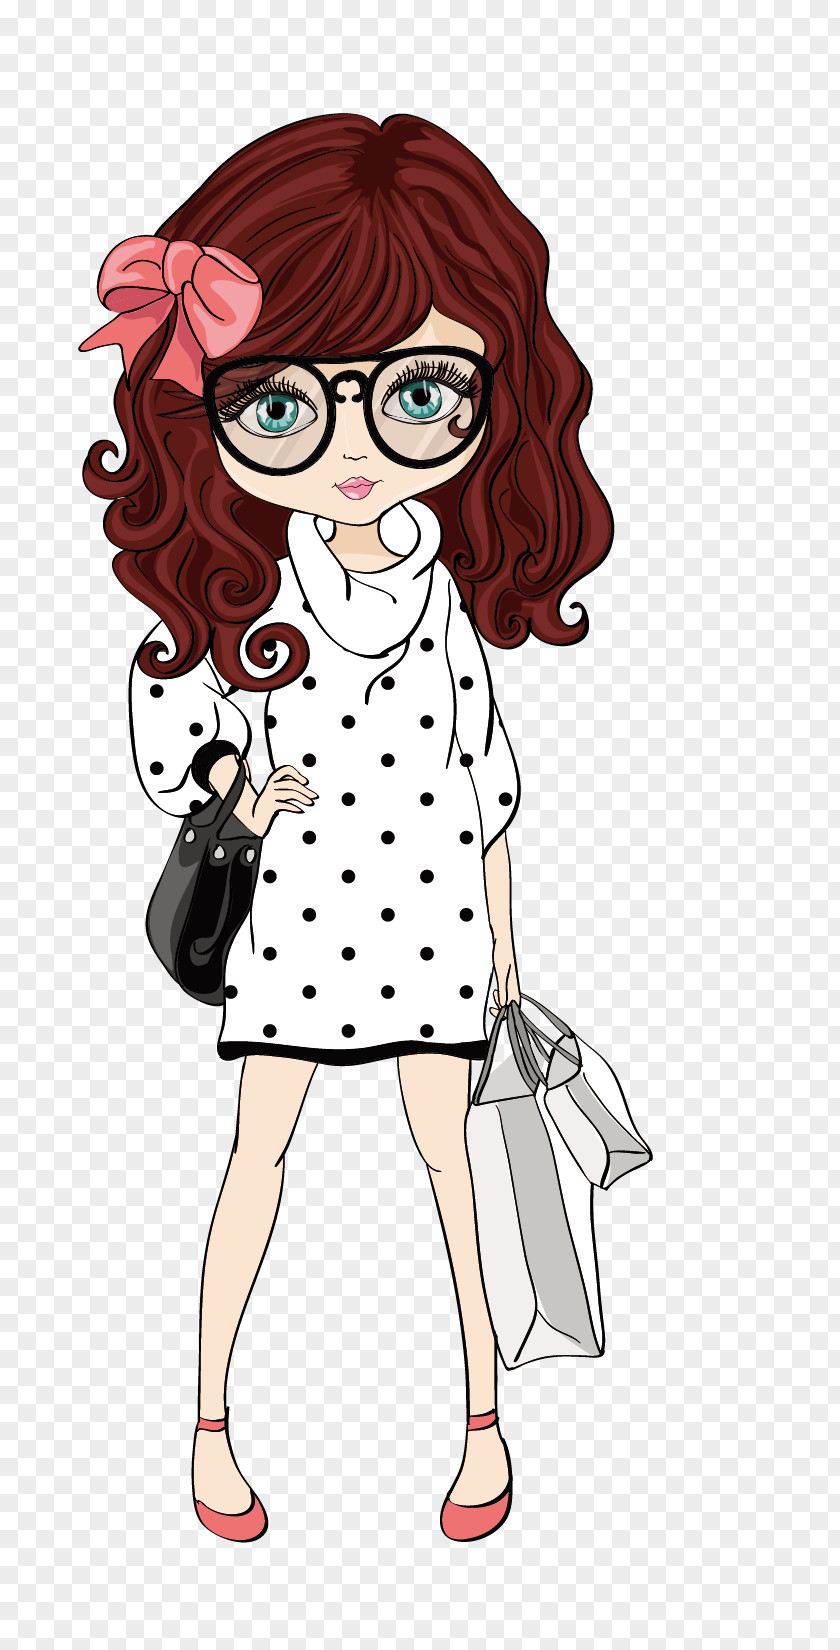 Drawing Girl Illustration PNG Illustration, Quiet girl, woman with white dress holding bags and wearing eyeglasses illustration clipart PNG